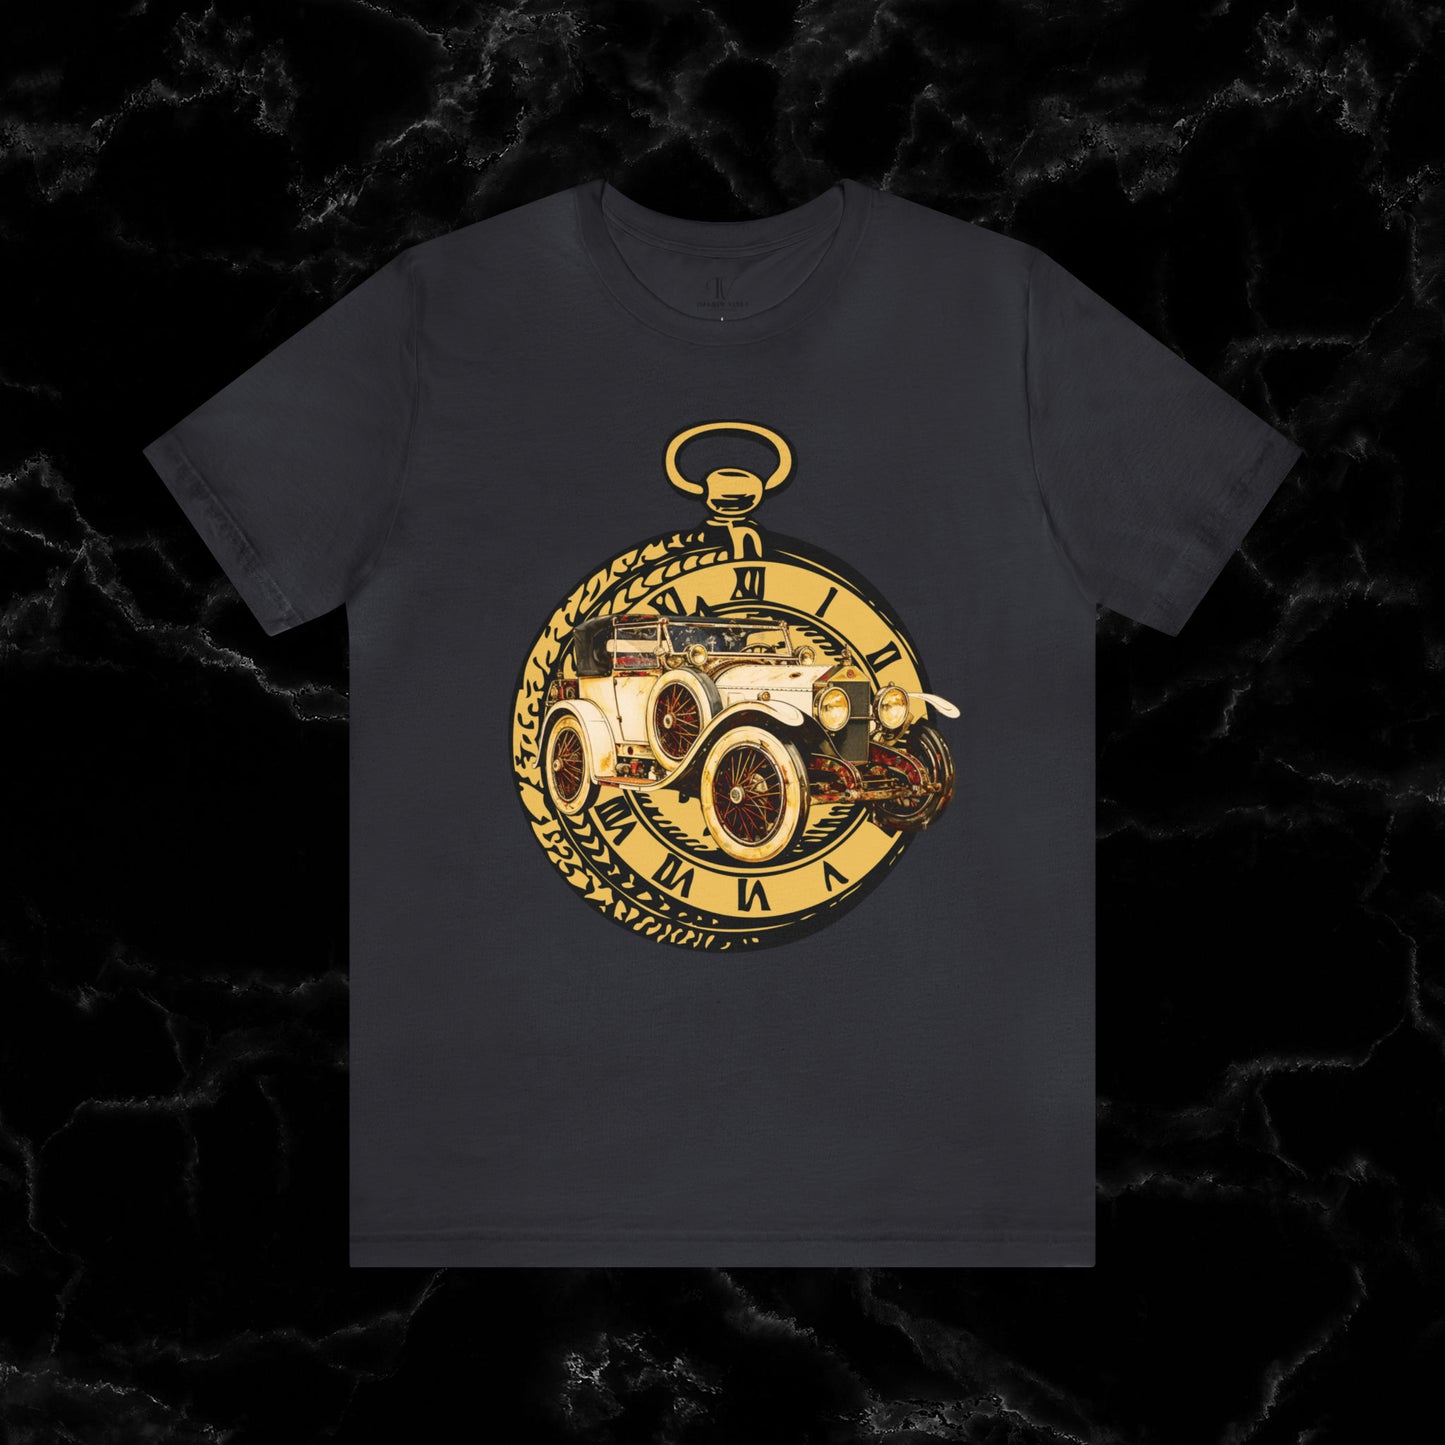 Ride in Style: Vintage Car Enthusiast T-Shirt with Classic Wheels and Timeless Appeal T-Shirt Dark Grey S 